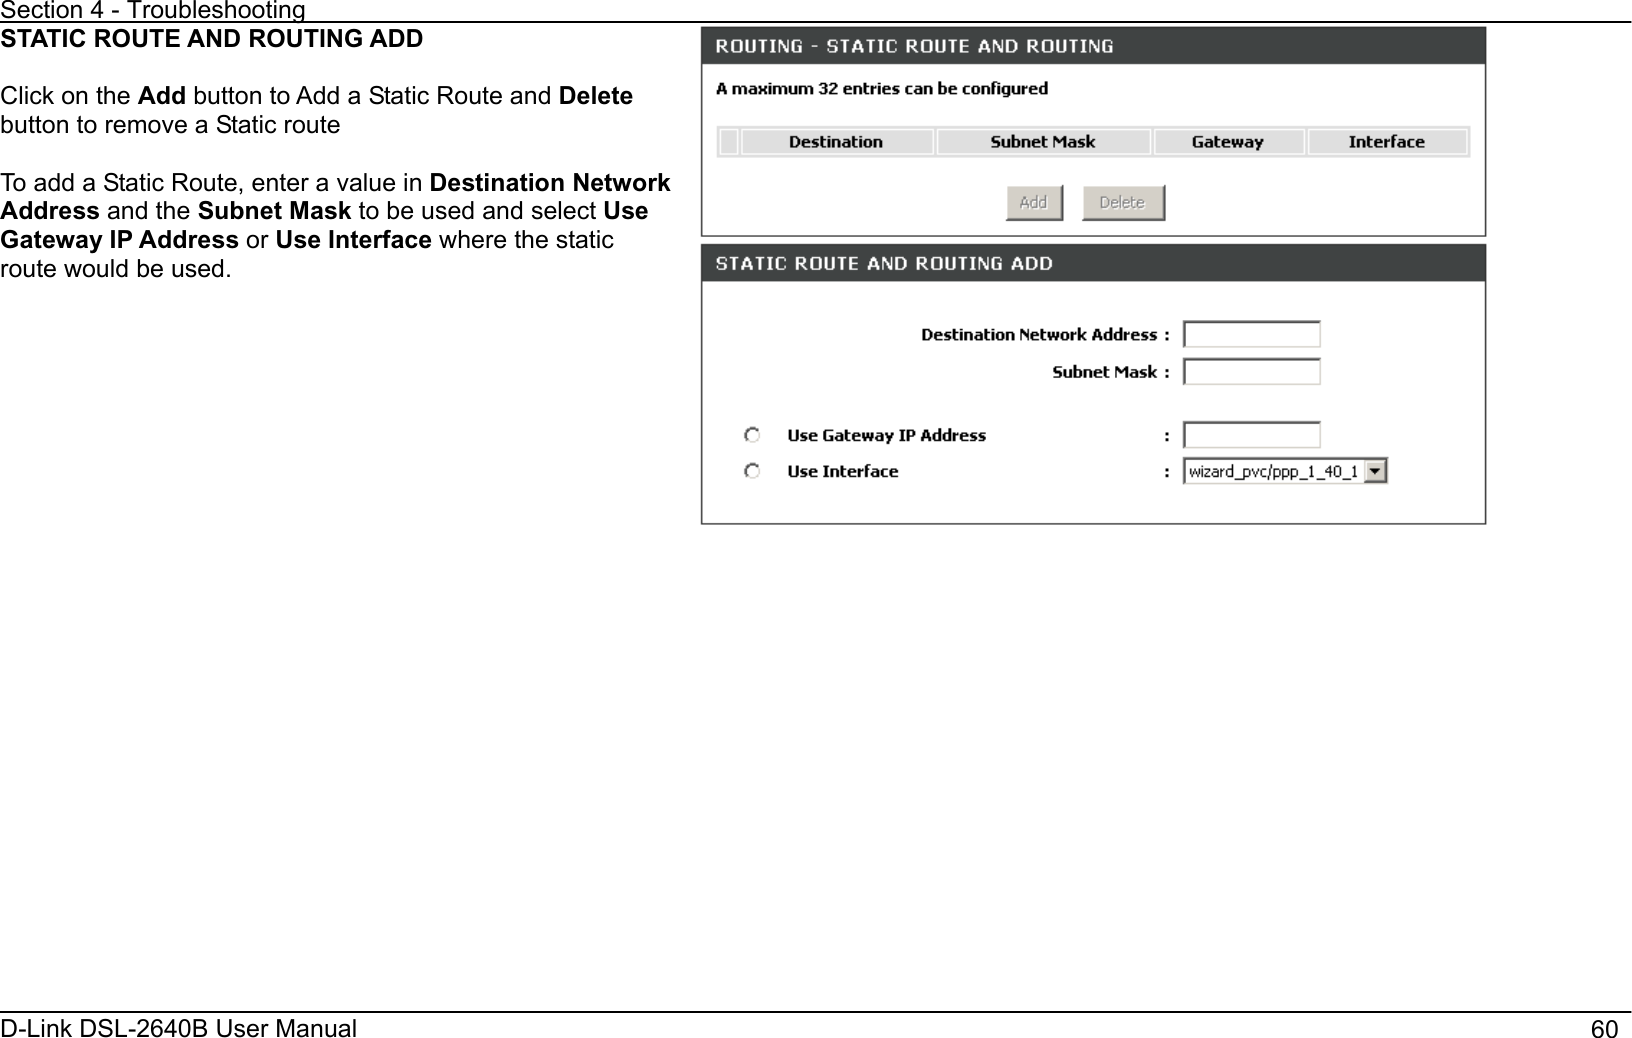 Section 4 - Troubleshooting D-Link DSL-2640B User Manual                                       60STATIC ROUTE AND ROUTING ADD Click on the Add button to Add a Static Route and Deletebutton to remove a Static route To add a Static Route, enter a value in Destination Network Address and the Subnet Mask to be used and select UseGateway IP Address or Use Interface where the static route would be used.